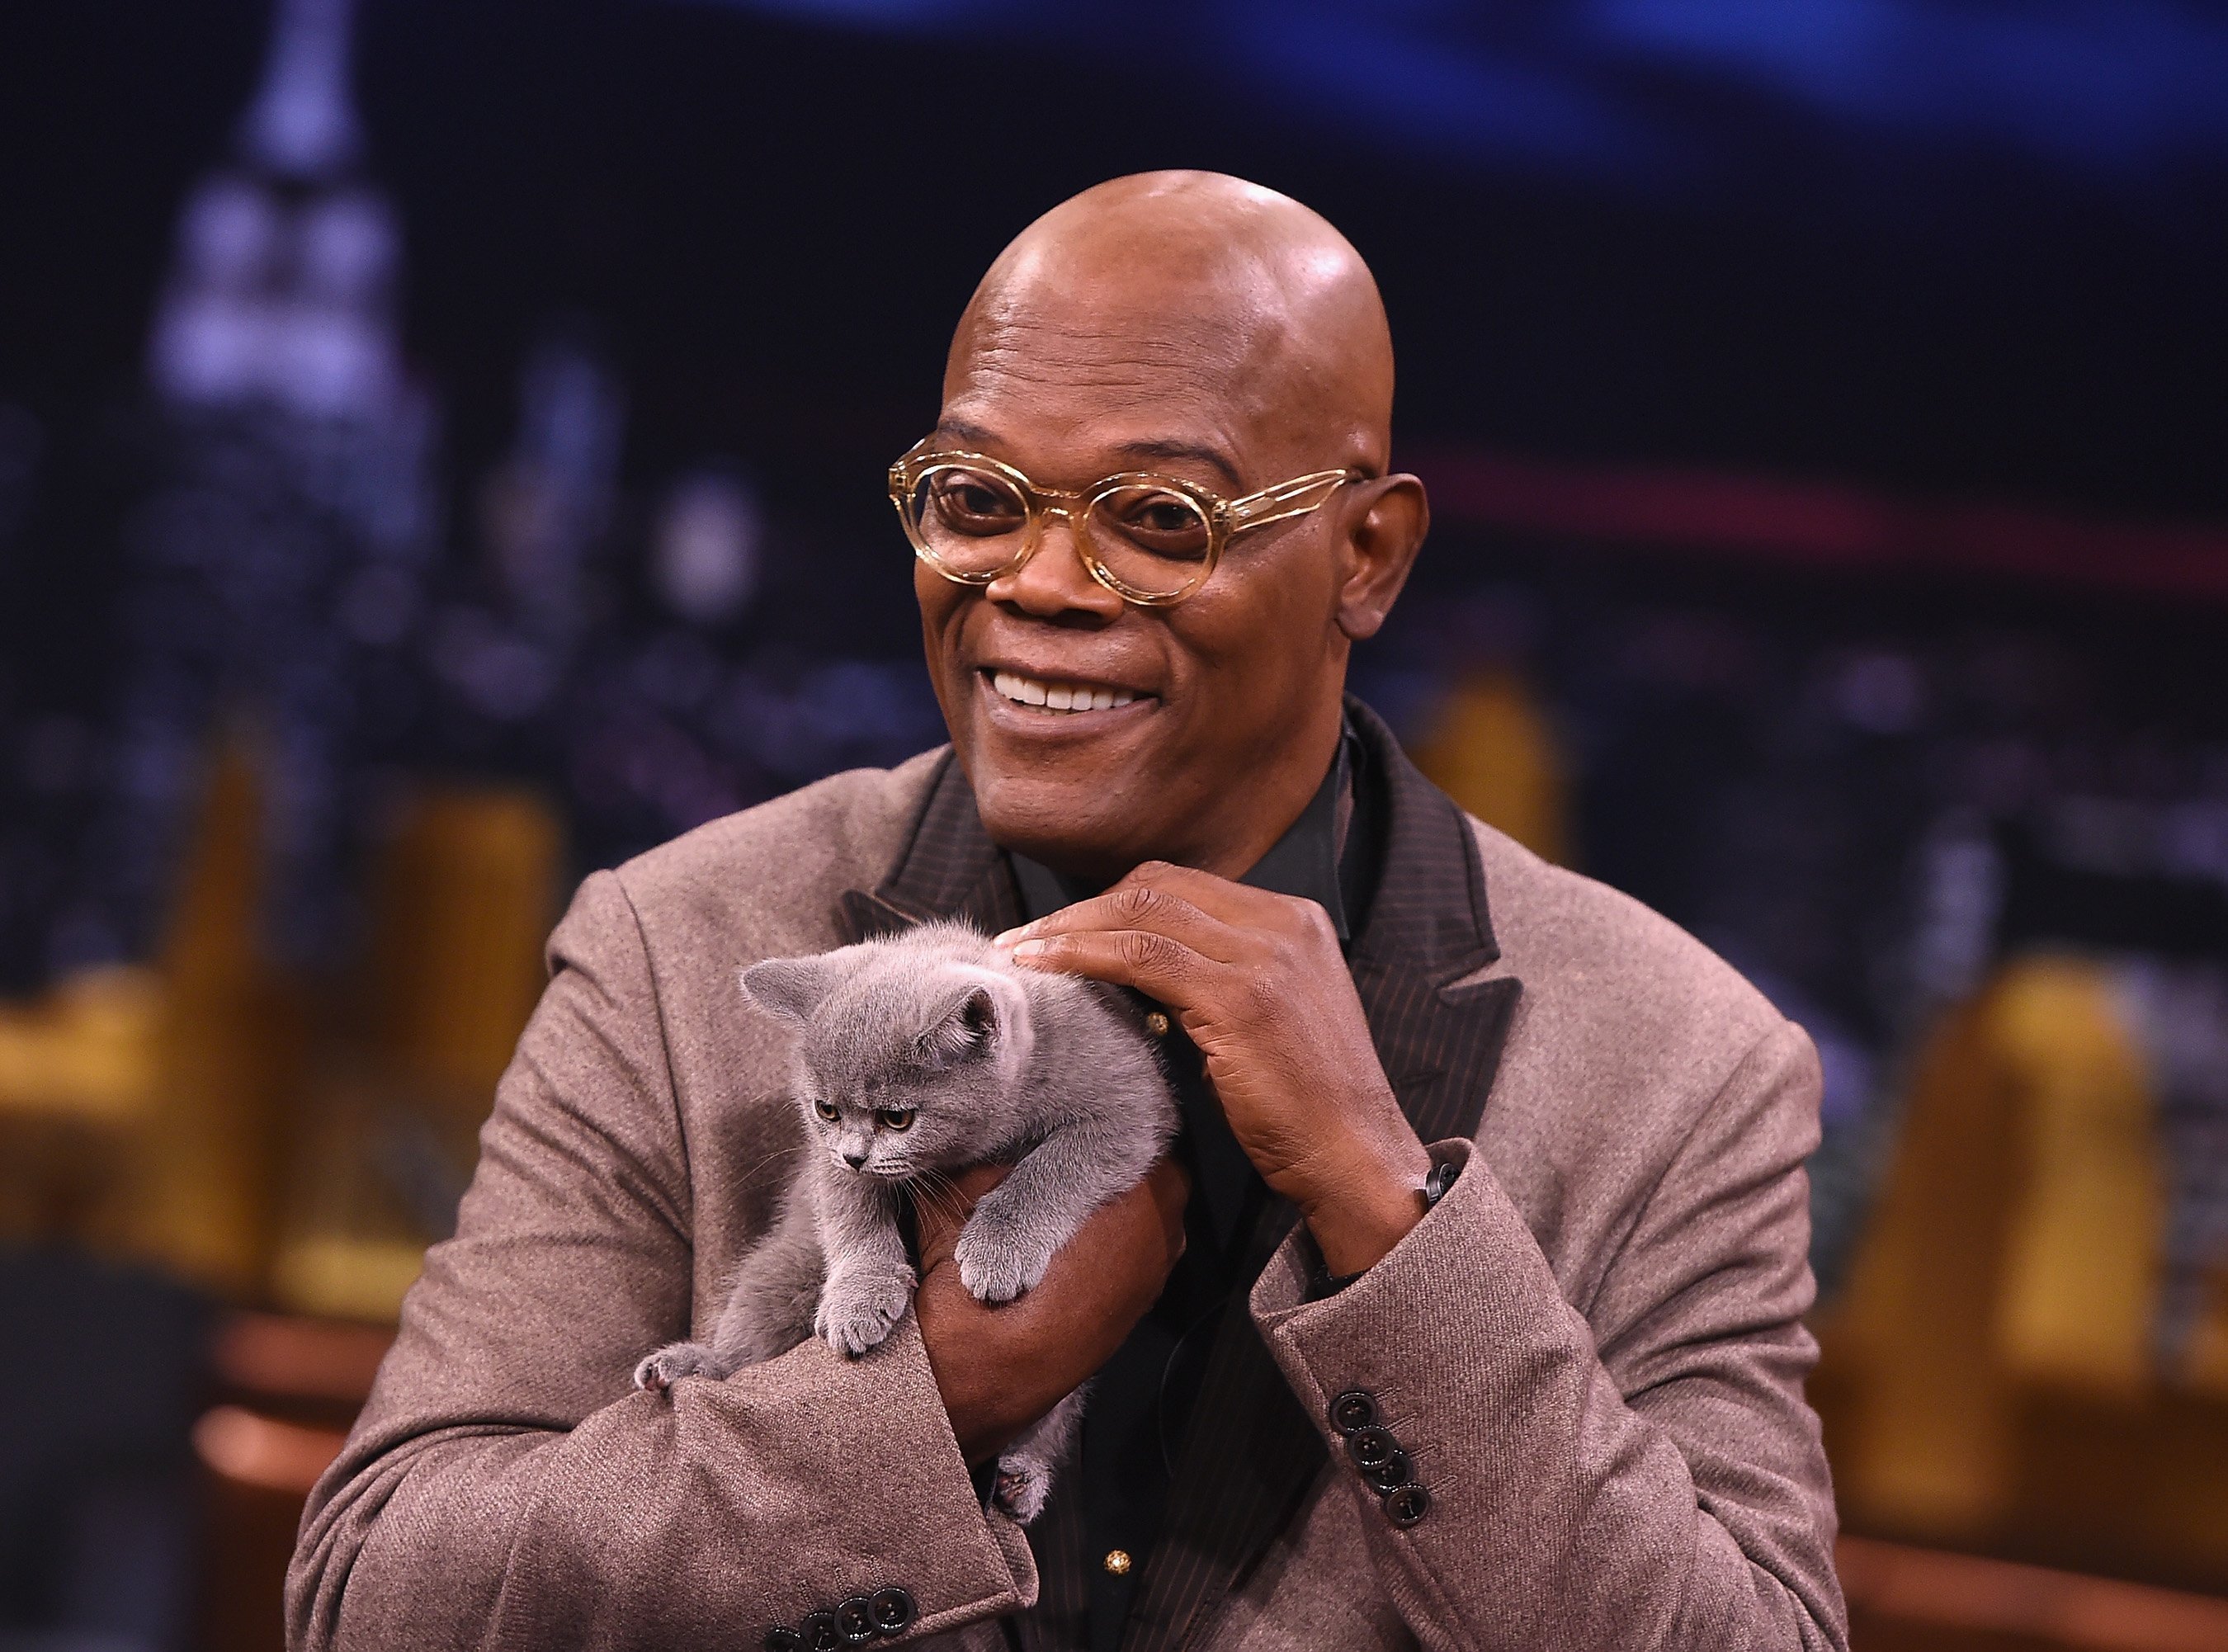 Samuel L. Jackson Visits "The Tonight Show Starring Jimmy Fallon at Rockefeller Center on September 26, 2016  | Photo: GettyImages